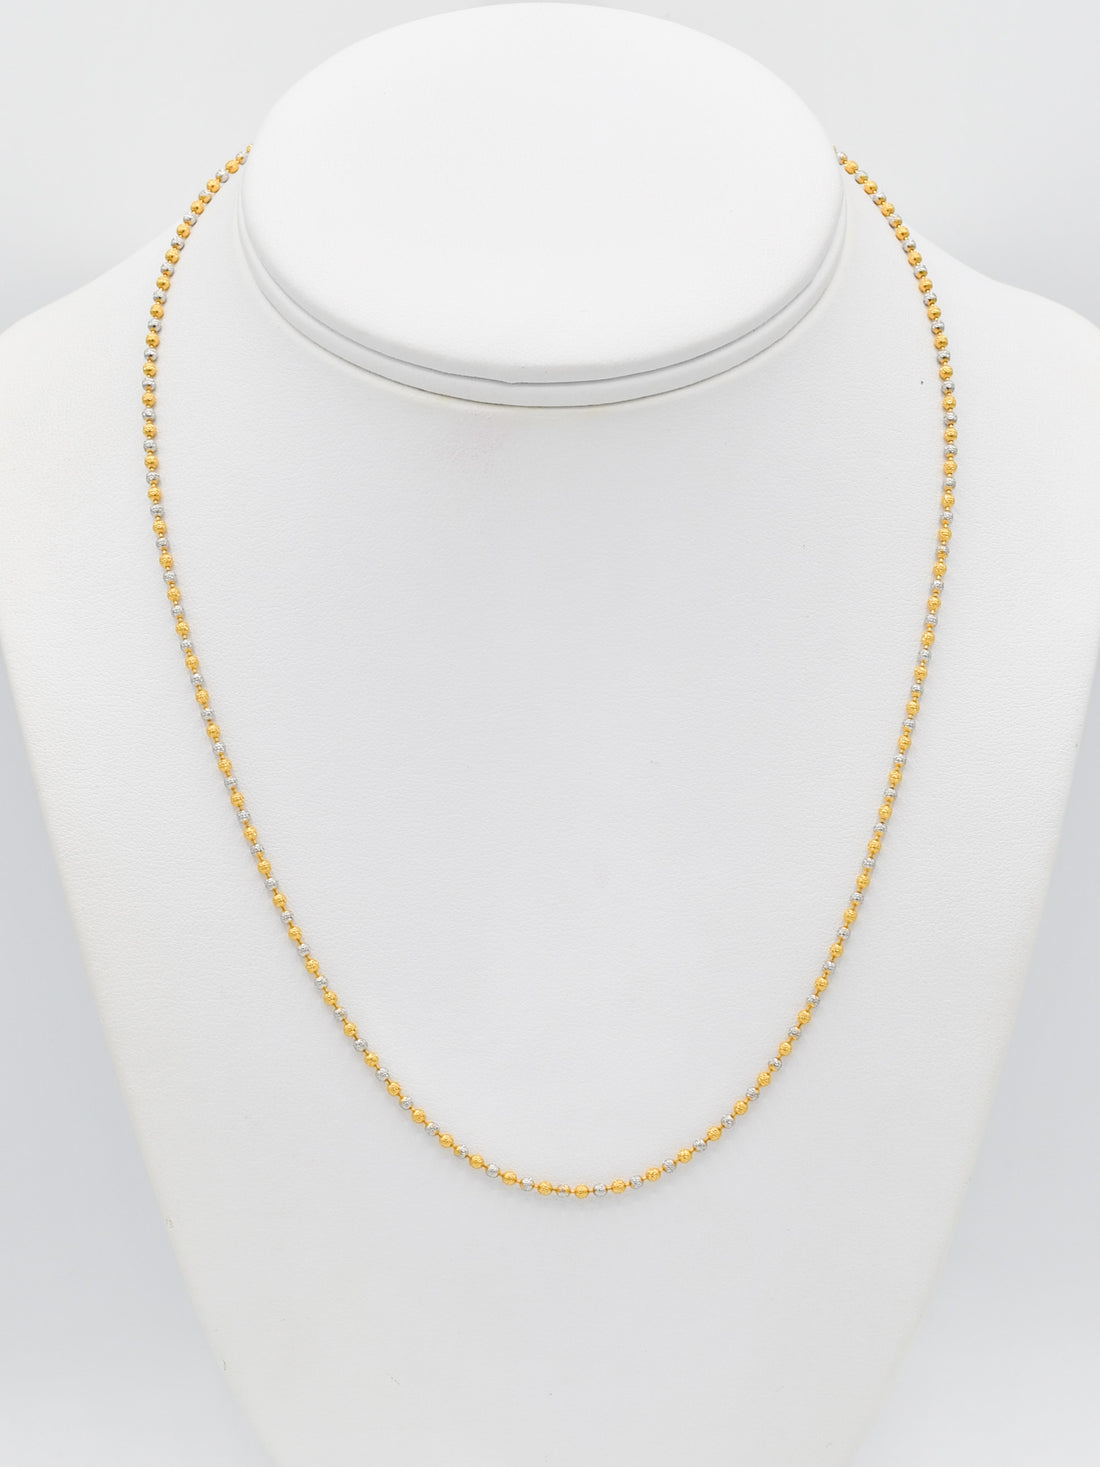 22ct Gold Two Tone Ball Chain - Roop Darshan